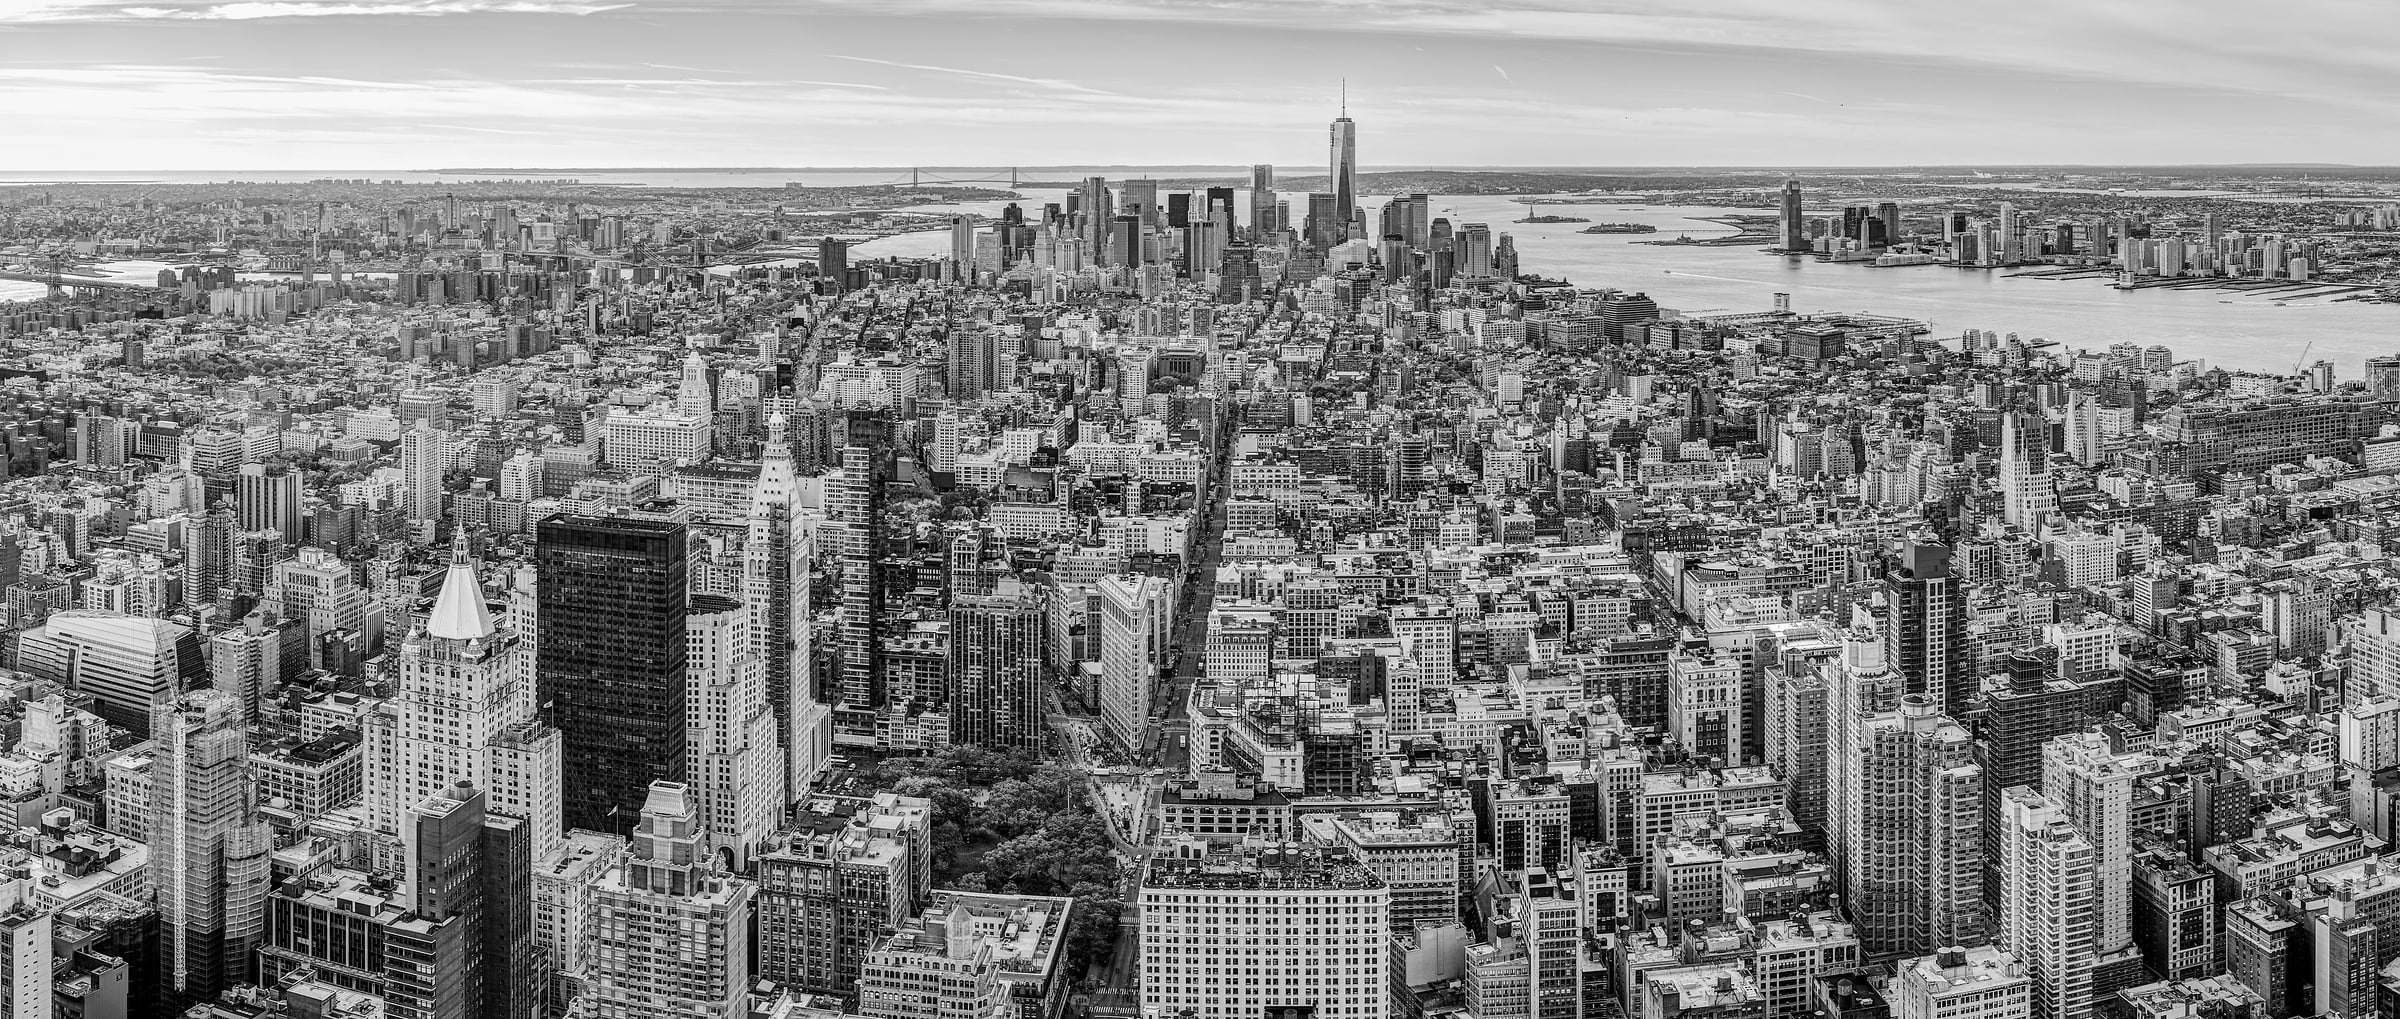 294 megapixels! A very high resolution, large-format VAST photo print of the view from the Empire State Building; black & white photograph created by Tim Lo Monaco at the Empire State Building in Manhattan, New York City, New York.